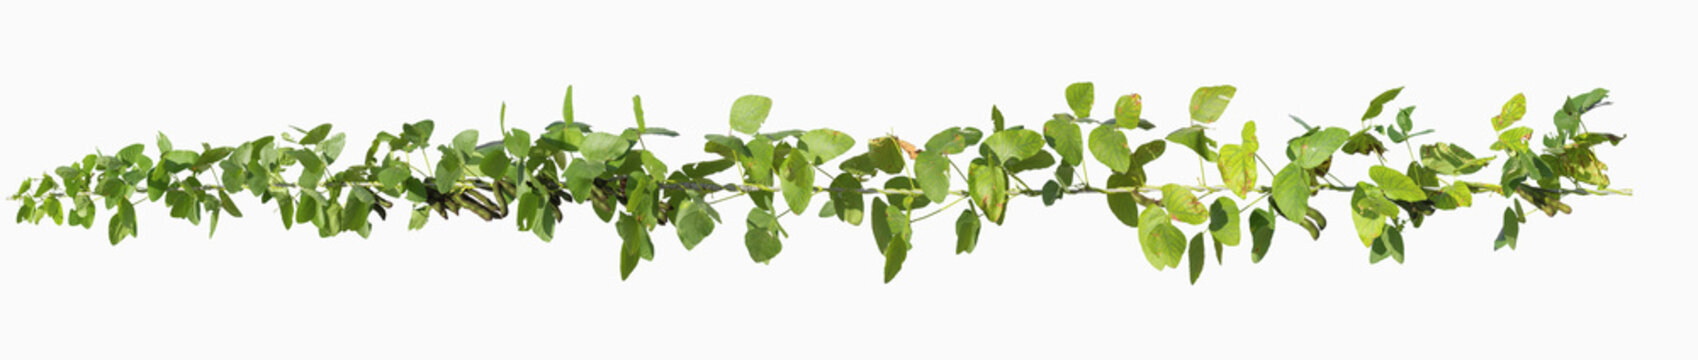 vine plants isolate on white background, clipping path included.